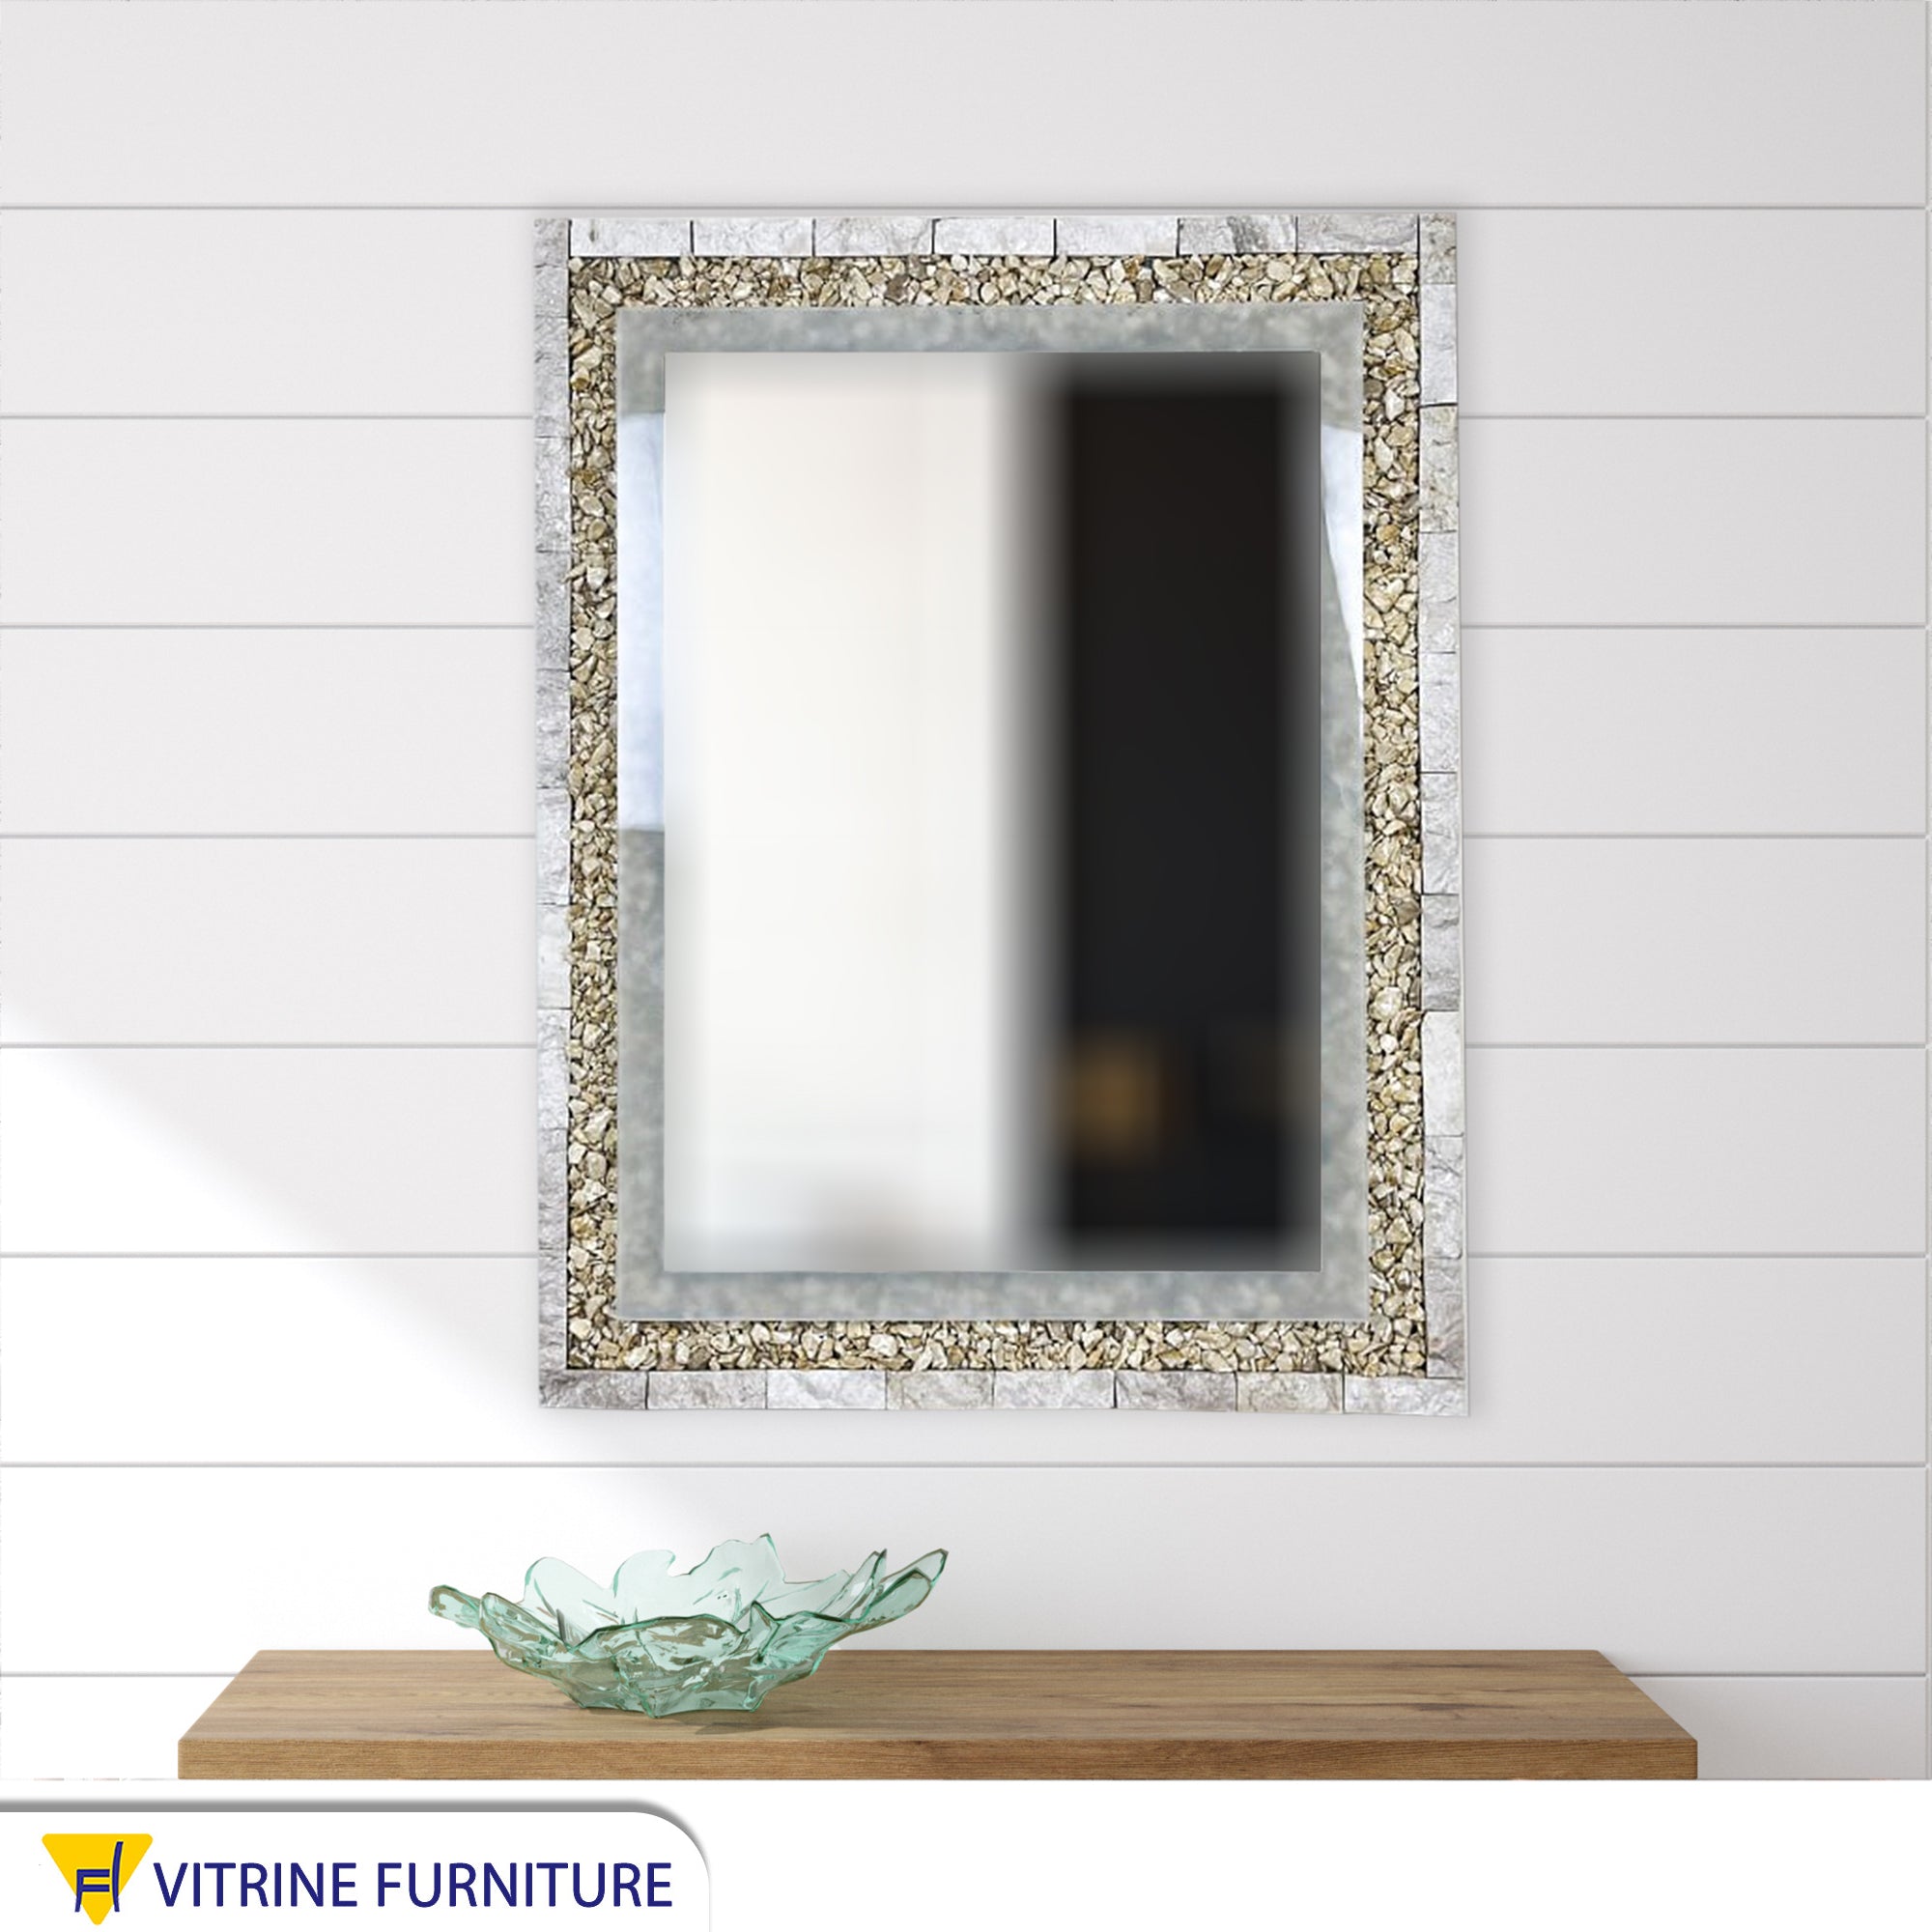 Rectangular mirror with a silver marble and stone frame